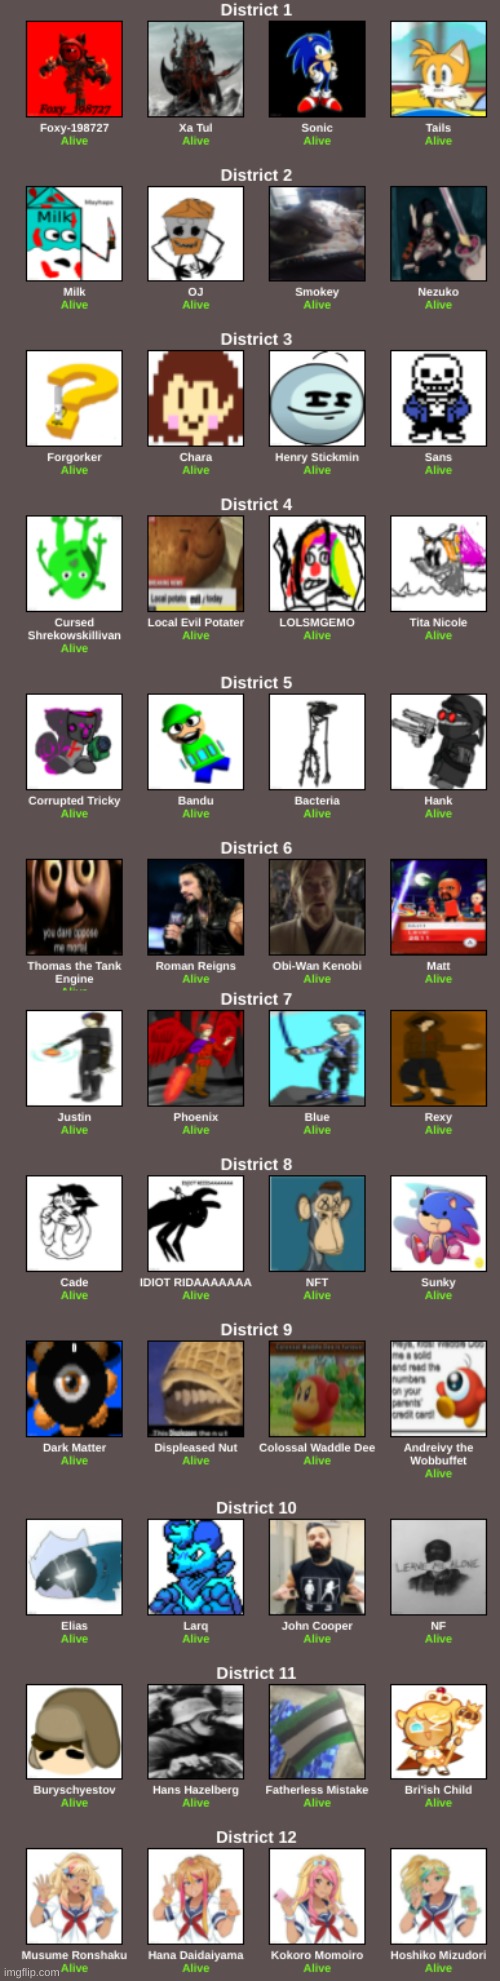 48 tributes in, one comes out alive. Who do you think will win? | made w/ Imgflip meme maker